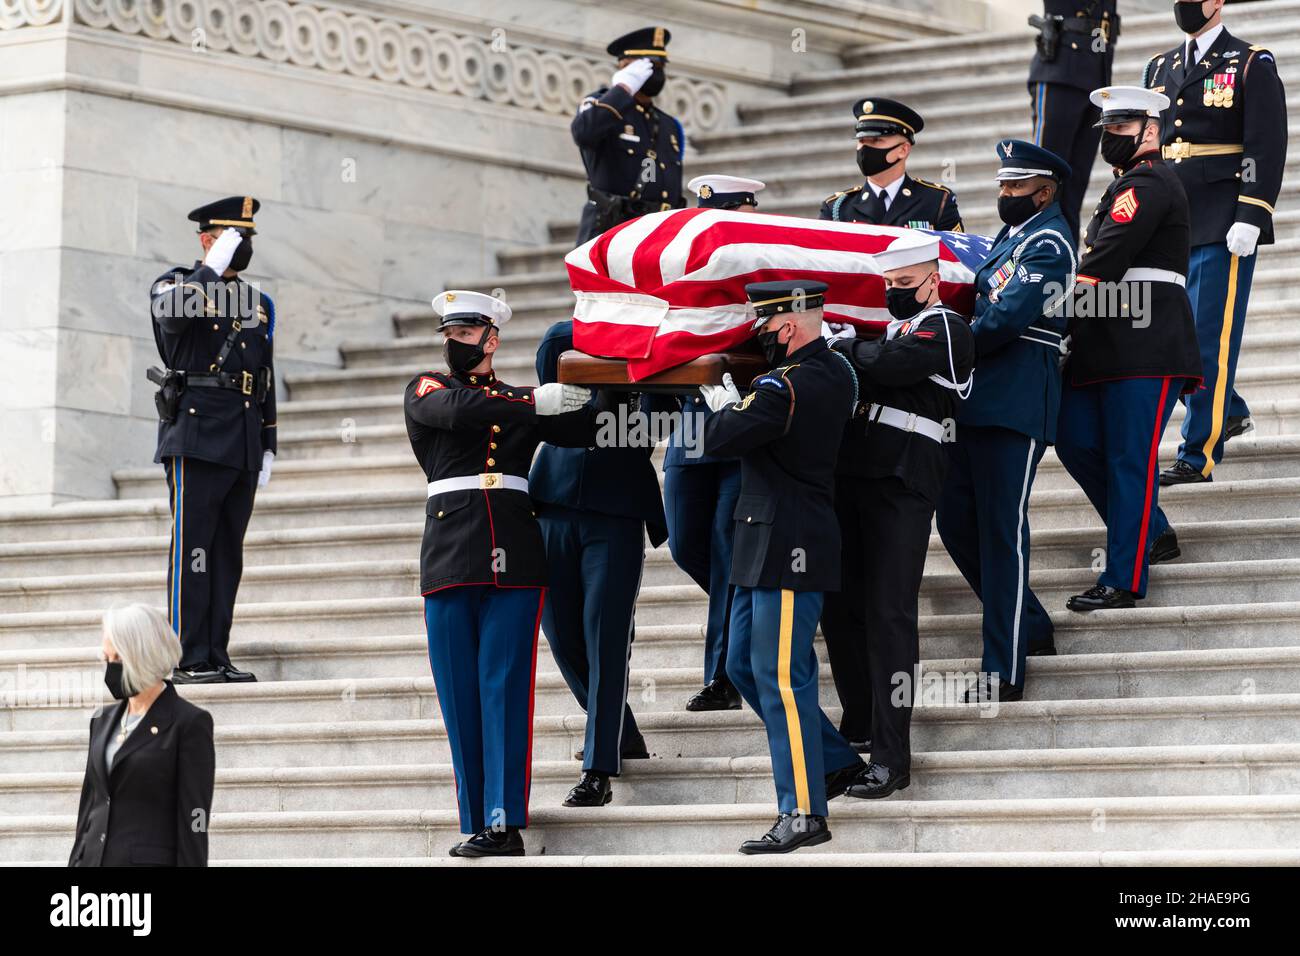 Washington, United States Of America. 10th Dec, 2021. Washington, United States of America. 10 December, 2021. An Armed Forces honor guard carry the flag-draped casket of World War II veteran and former Senator Robert Dole down the steps of the U.S. Capitol, December 10, 2021 in Washington, DC Senator Dole died at age 98 following a lifetime of service to the nation. Credit: Sgt. Zachery Perkins/U.S. Army/Alamy Live News Stock Photo